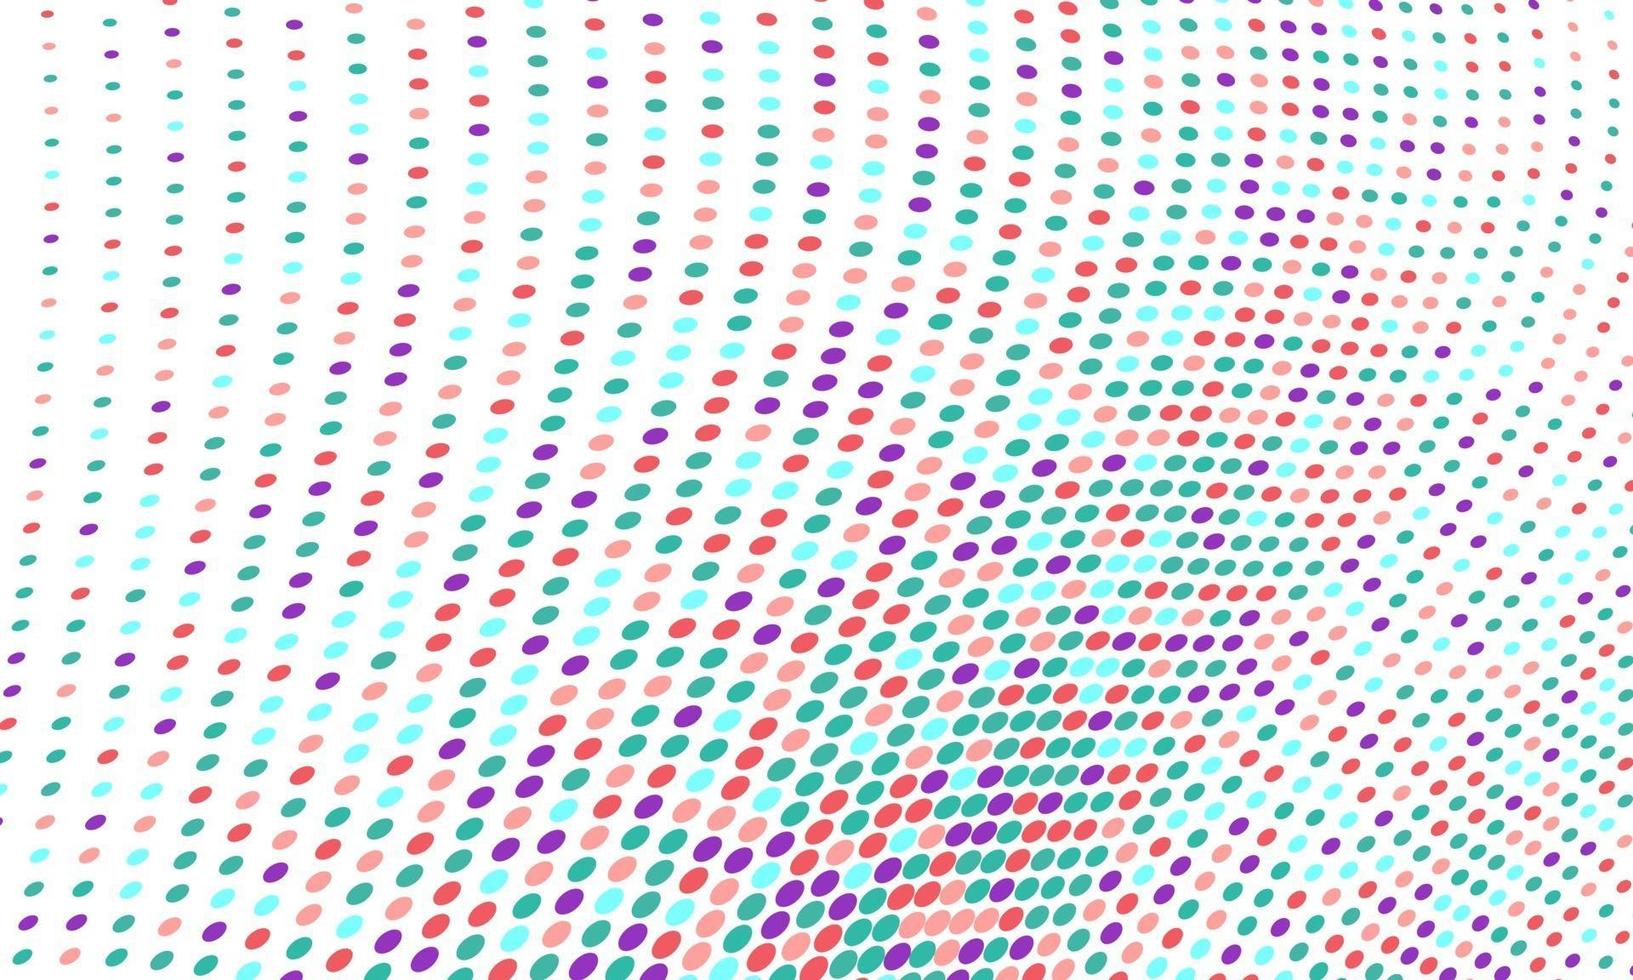 Colorful Curved Dots Pattern vector